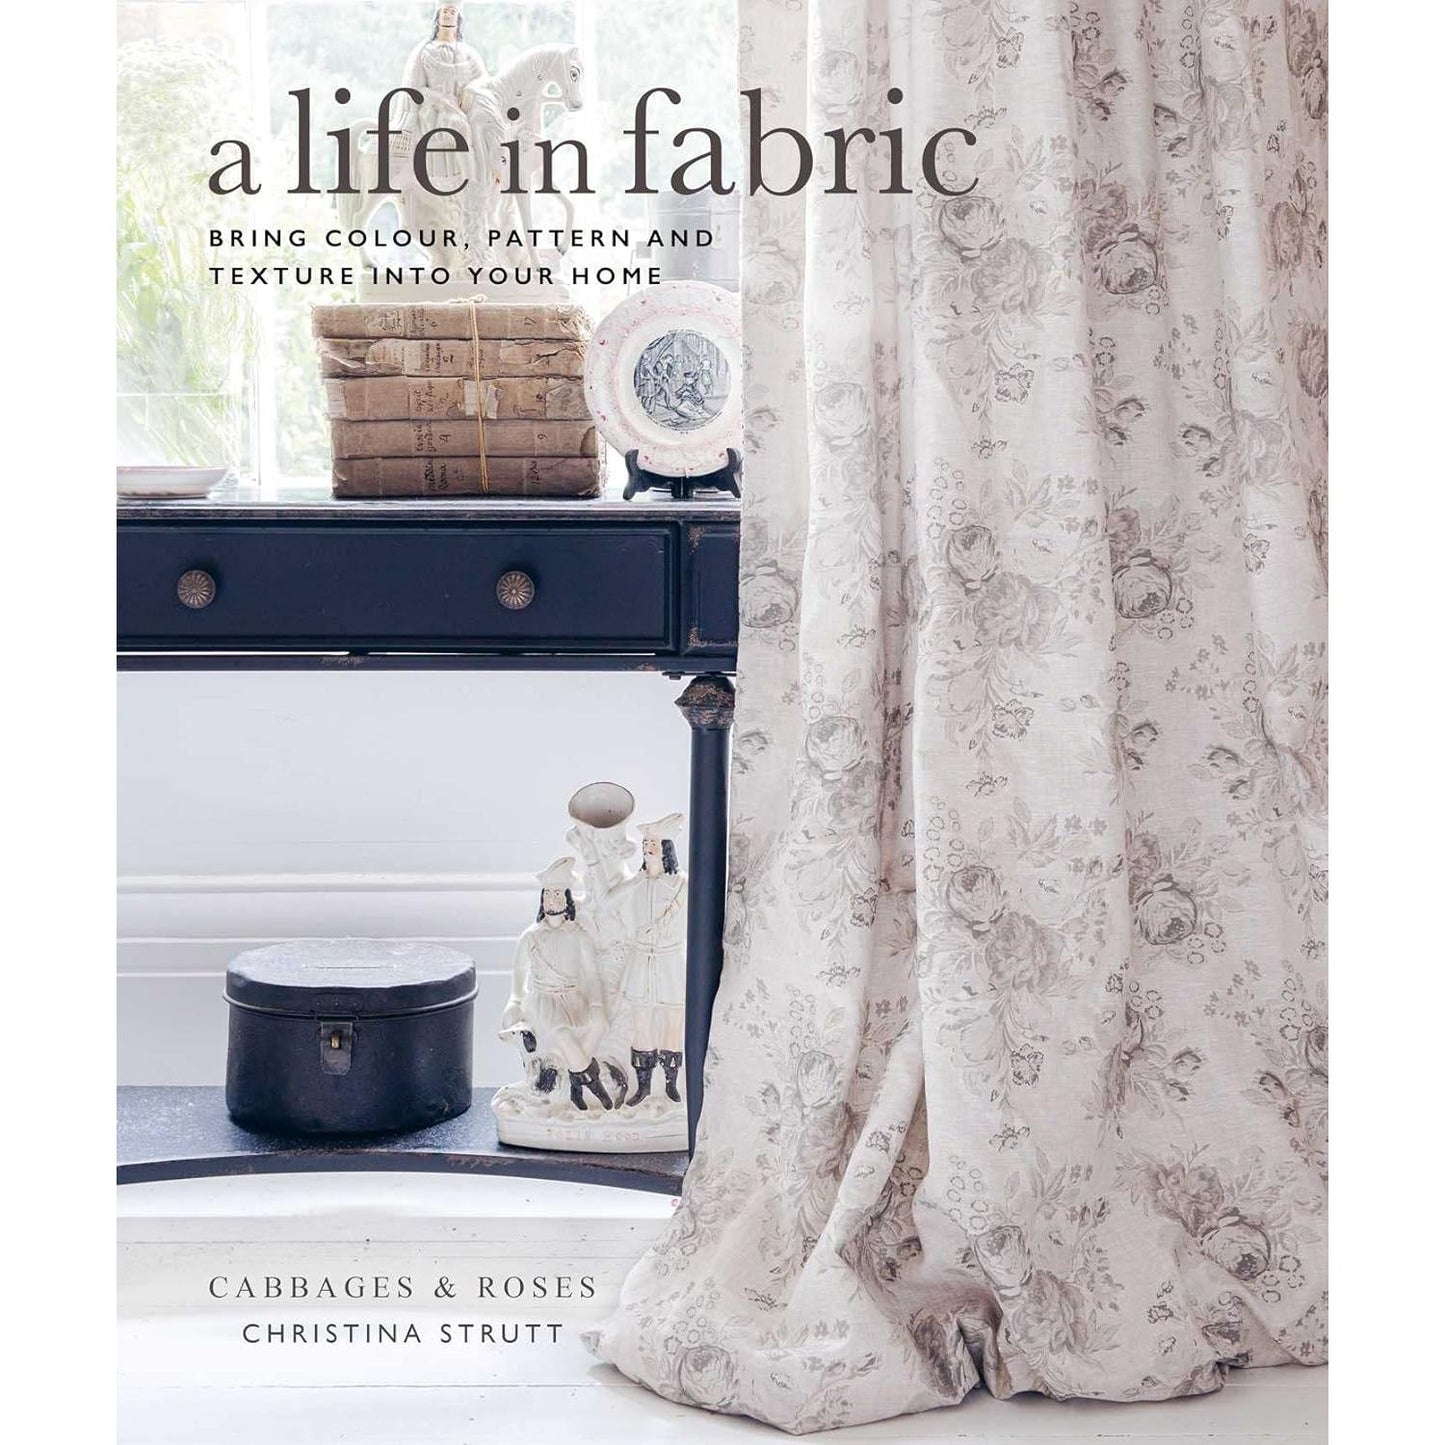 A Life in Fabric: Bring Colour, Pattern and Texture into Your Home